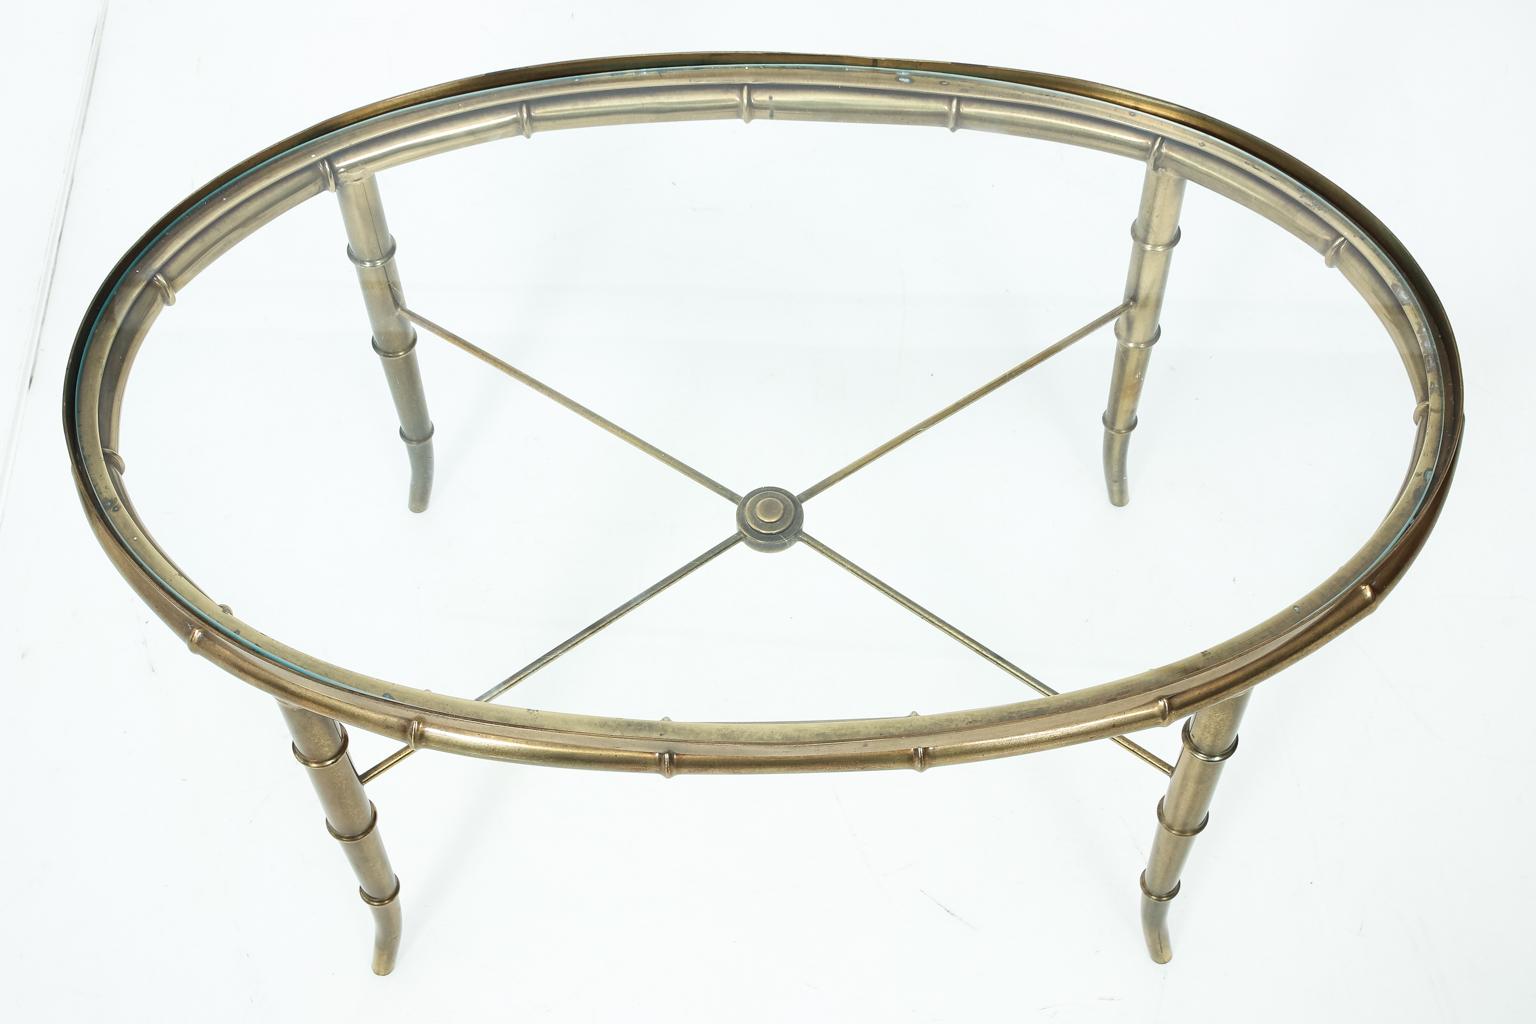 Oval brass table with glass top and bottom X-shaped cross stretcher, circa mid-20th century. Please note of wear consistent with age due to daily use seen on the legs.